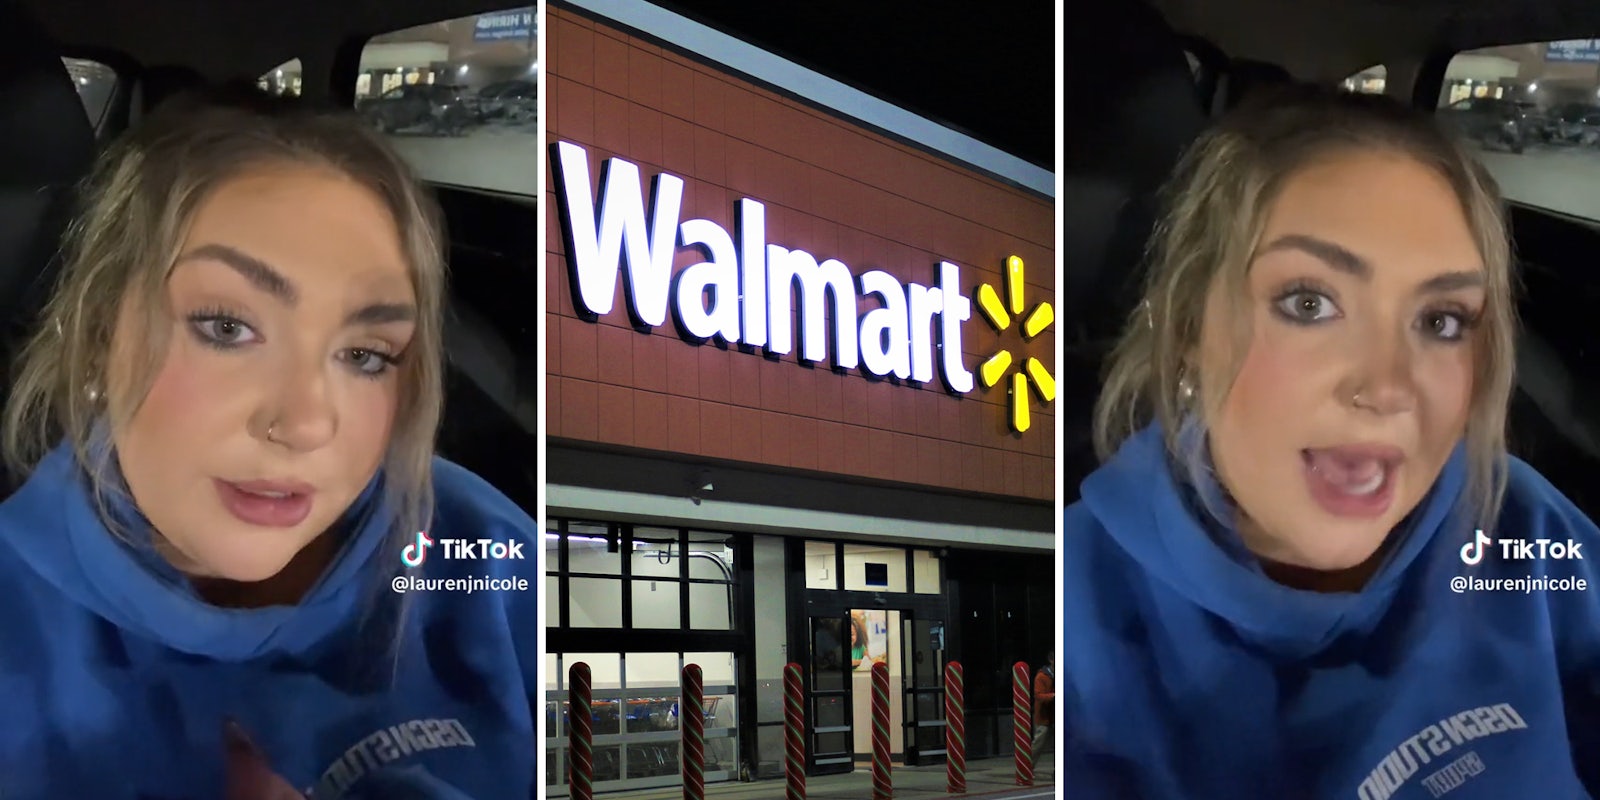 young woman in car in parking lot (l&r) walmart sign (c)